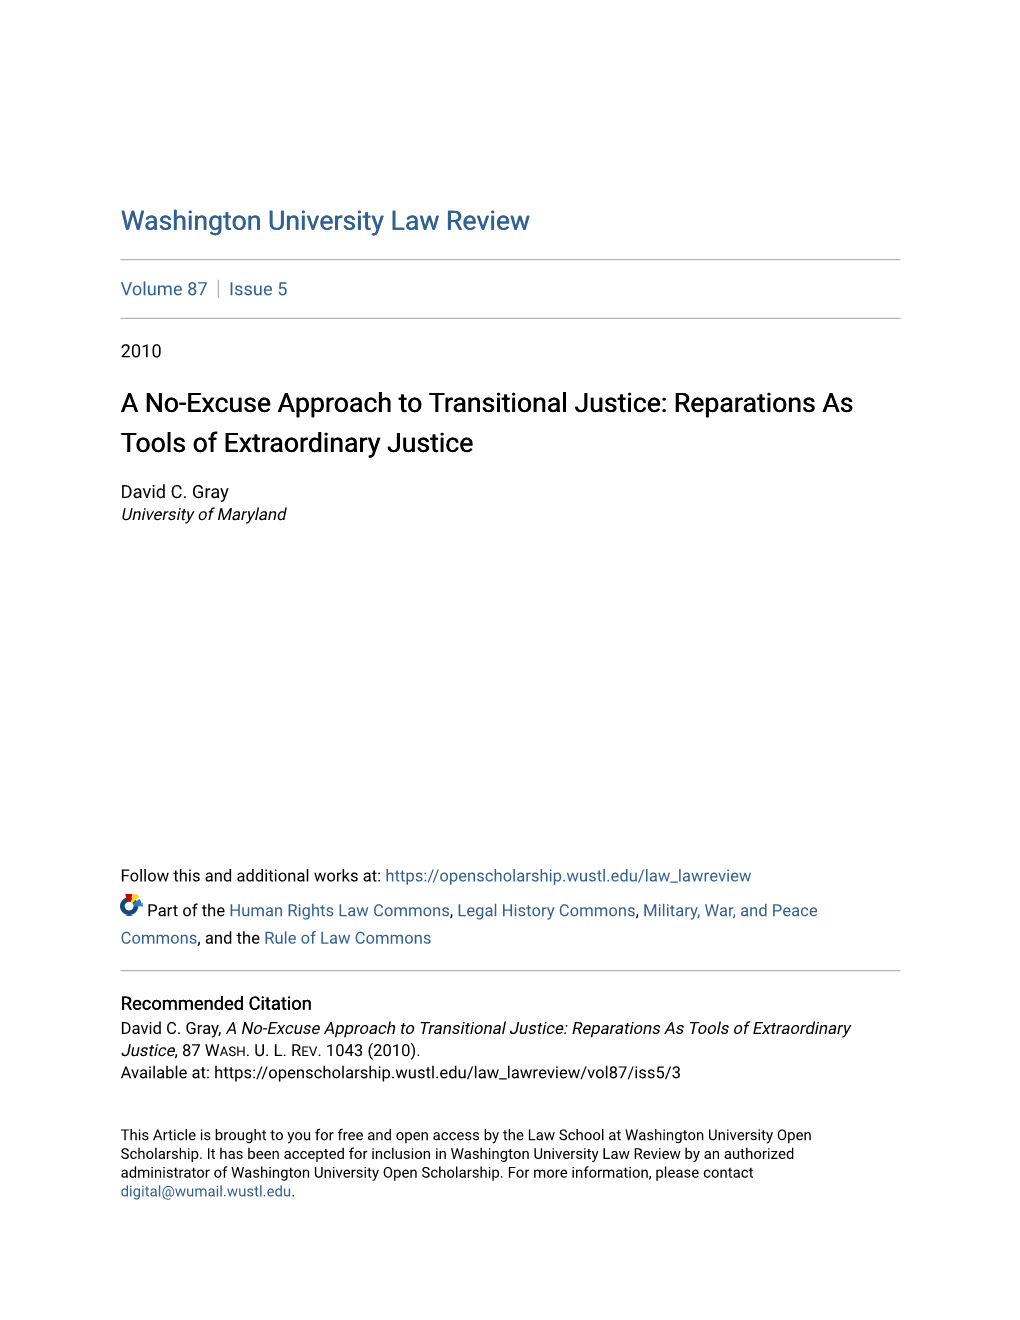 A No-Excuse Approach to Transitional Justice: Reparations As Tools of Extraordinary Justice